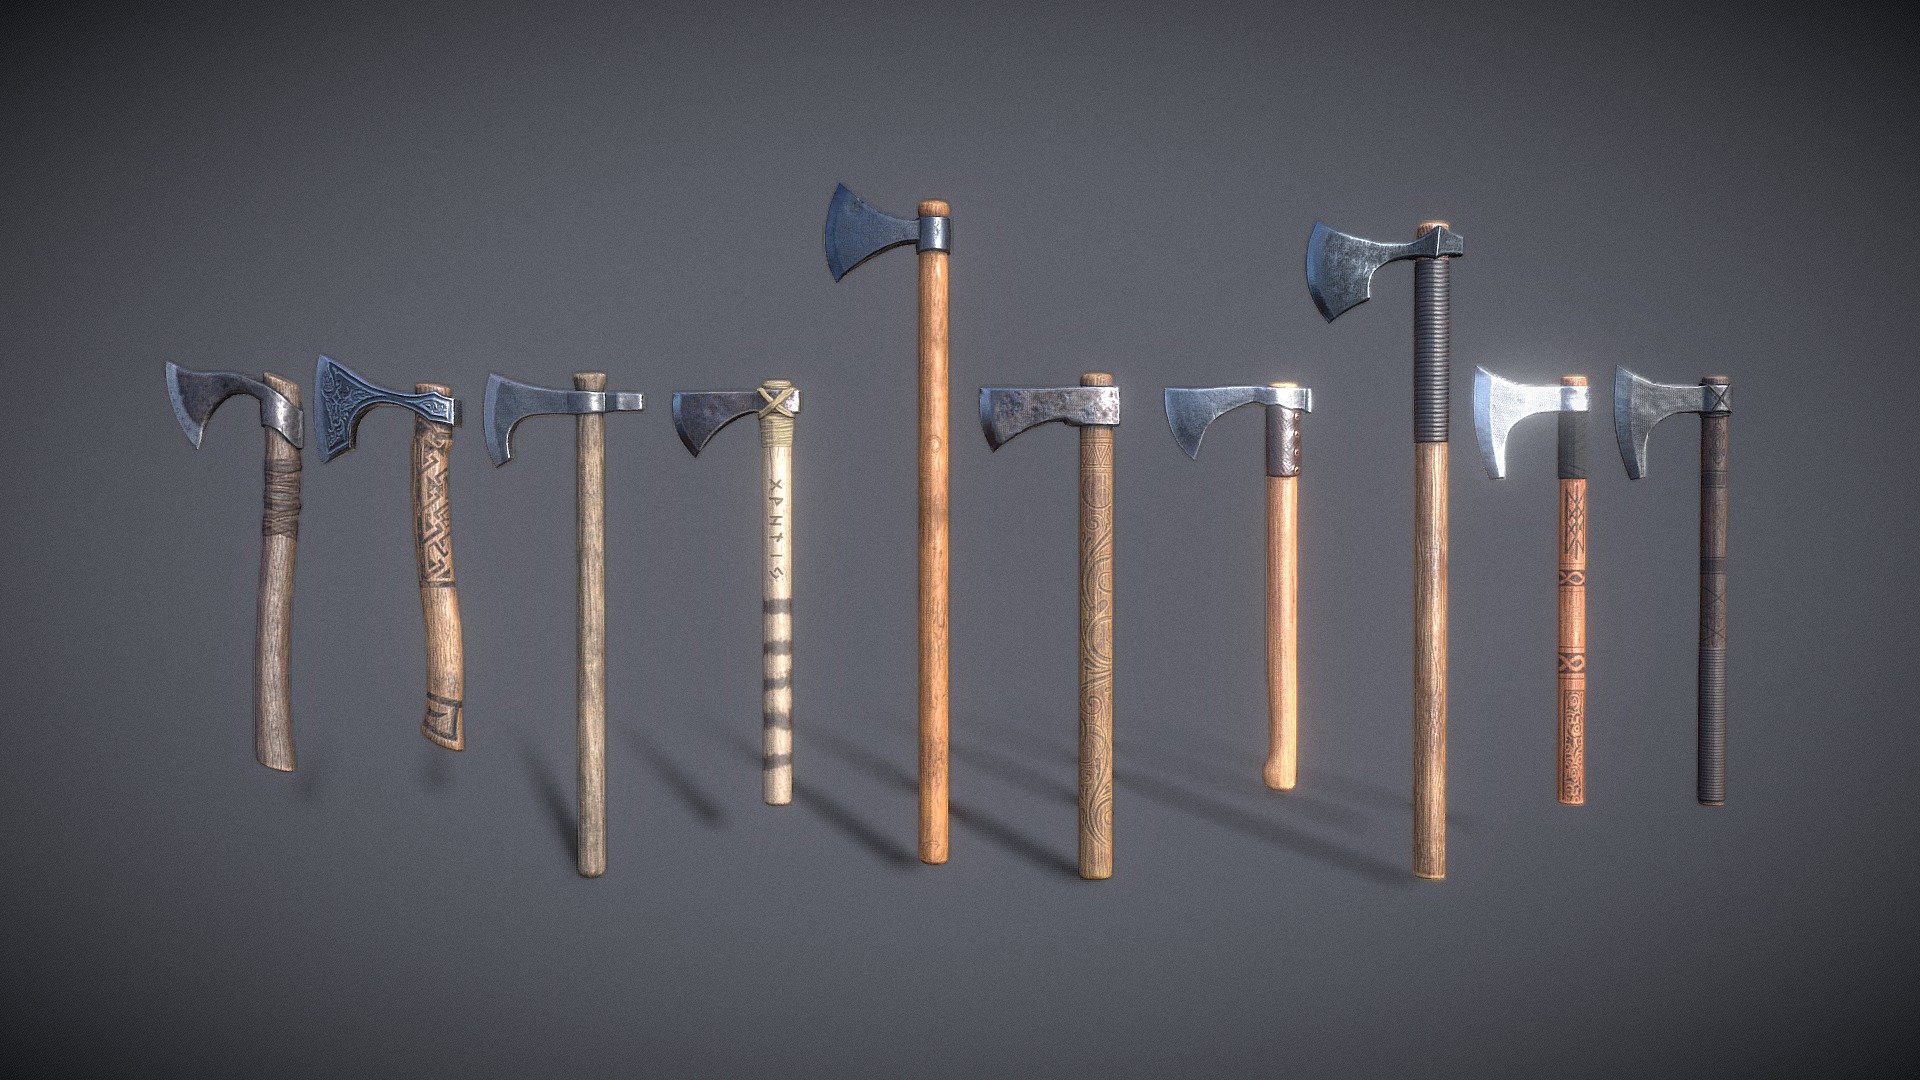 A set of quality Axes. Consists of 10 original items. Each ax has a PBR texture with a resolution of 2048x2048. Total polygons (triangles) 9228, vertices 4634

Ax 01 - 1076

Ax 02 - 1026

Ax 03 - 716

Ax 04 - 1186

Ax 05 - 750

Ax 06 - 666

Ax 07 - 1154

Ax 08 - 696

Ax 09 - 650

Ax 10 - 1308

The archive contains additional materials: FBX, OBJ, Blend files. 2k textures - PNG, JPG and PNG (Unity Metallic Smoothness)

Archives with textures contain:

Textures JPG - Albedo, AO, Metalic, Normal, Roughness.

Textures PNG - base color, metalic, normal, roughness

Texturing Unity (Metallic Smoothness) - AlbedoTransparency, MetallicSmoothness, Normal - Medieval Ax Set 01 - 3D model by zilbeerman 3d model